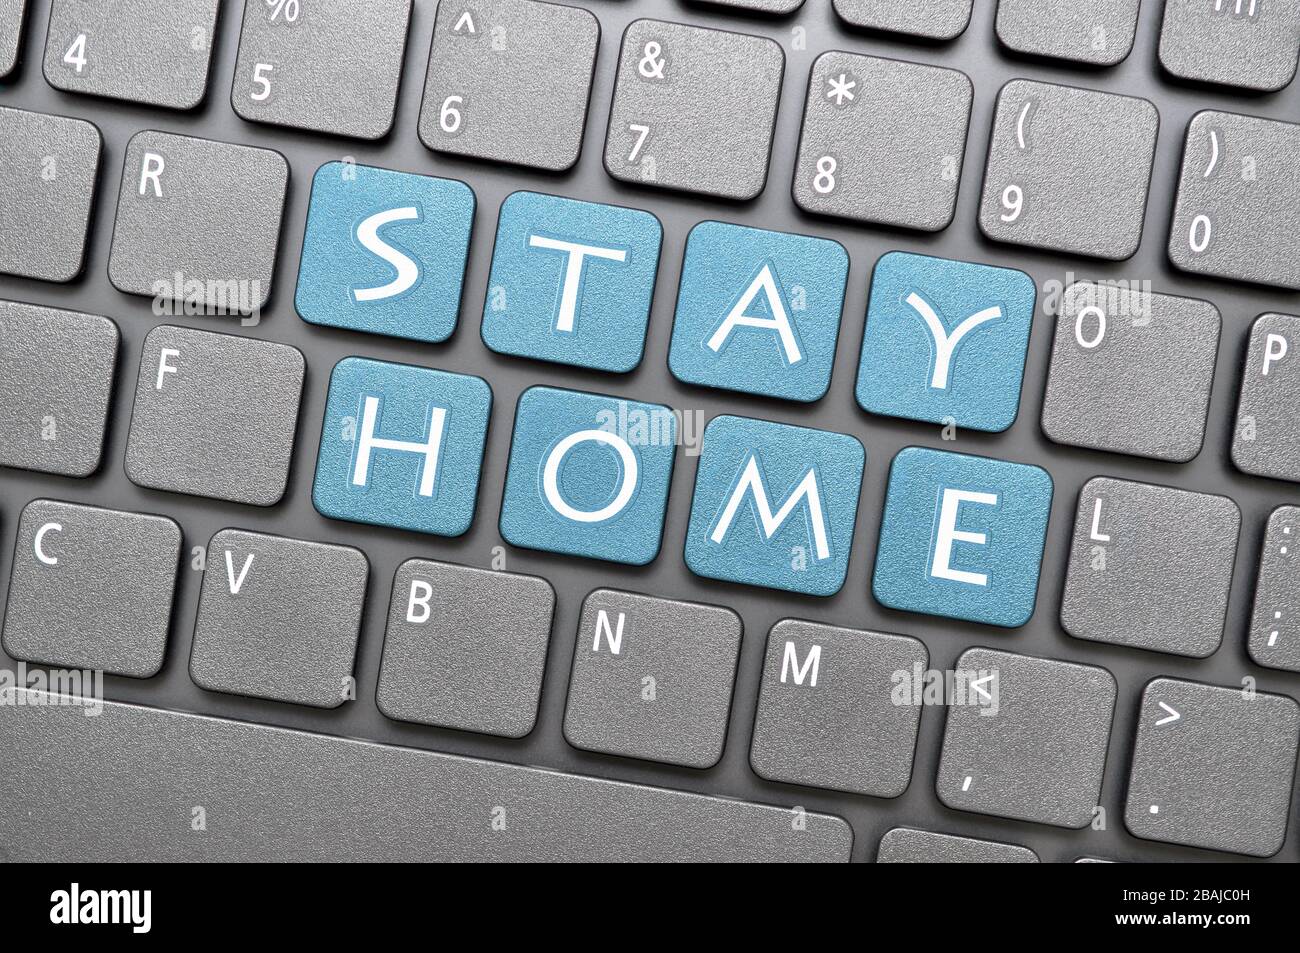 Stay home key on keyboard Stock Photo